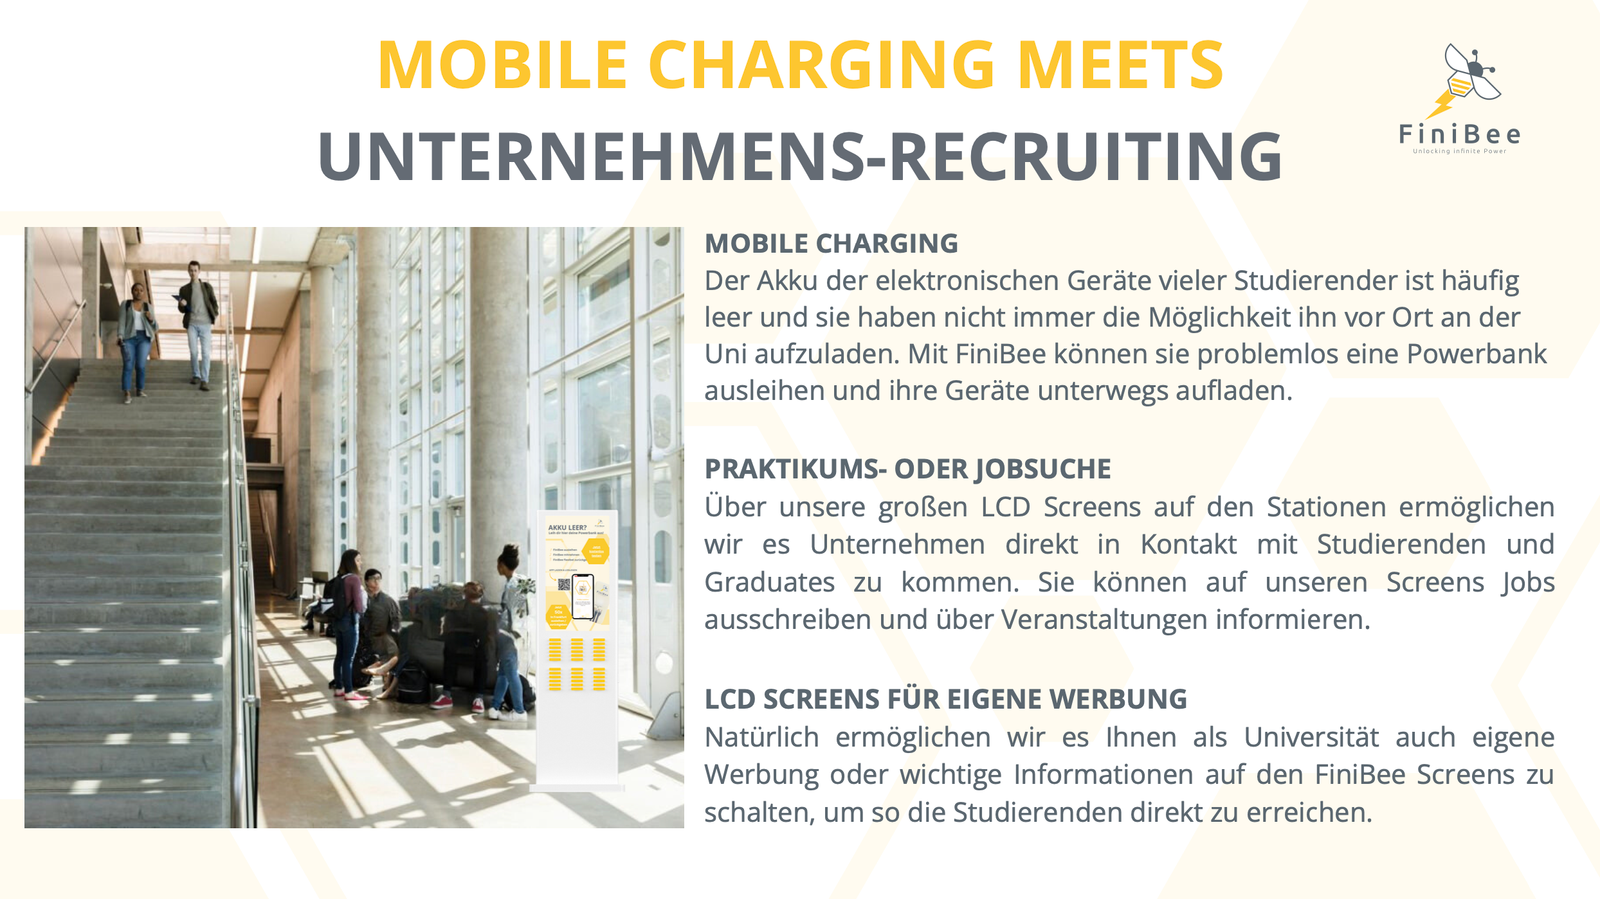 MOBILE CHARGING MEETS UNTERNEHMENS-RECRUITING